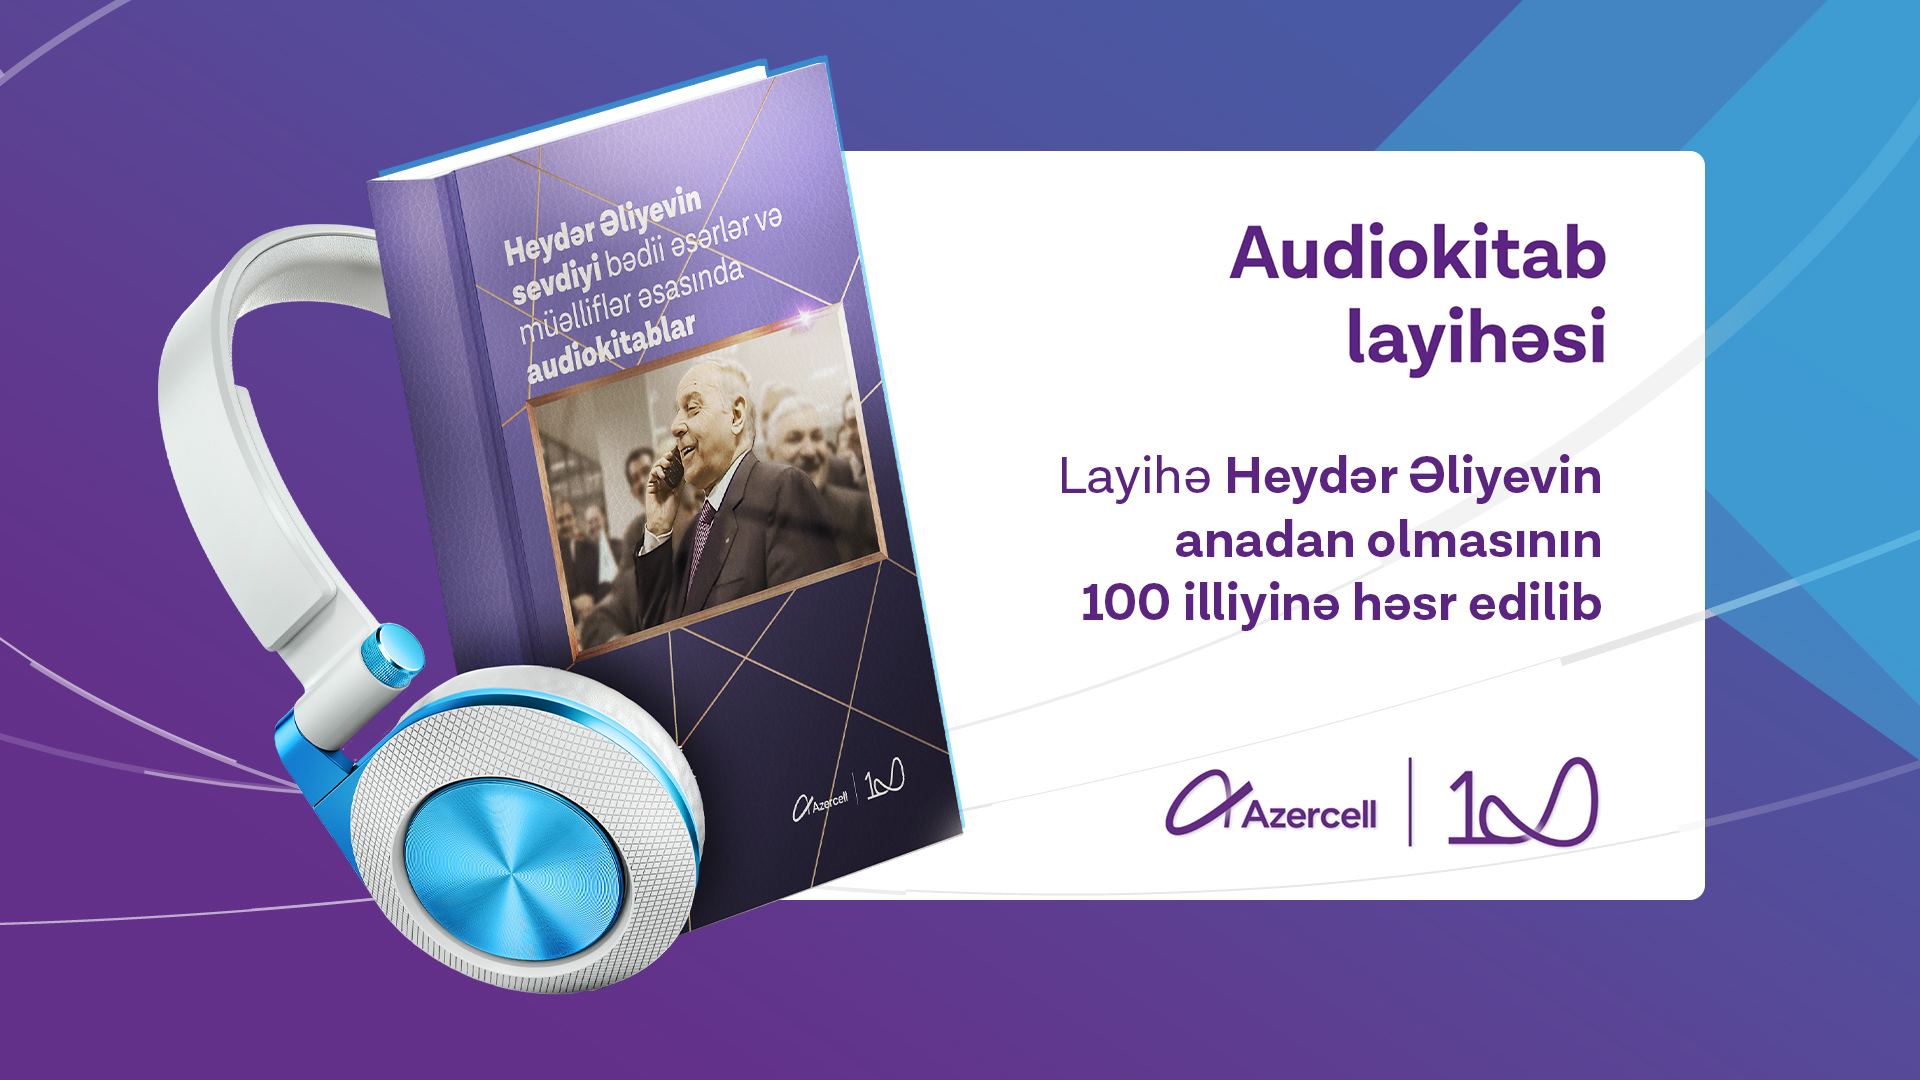 (Ad) Azercell introduces favorite books of national leader Heydar Aliyev in e-book and audiobook format (VIDEO)